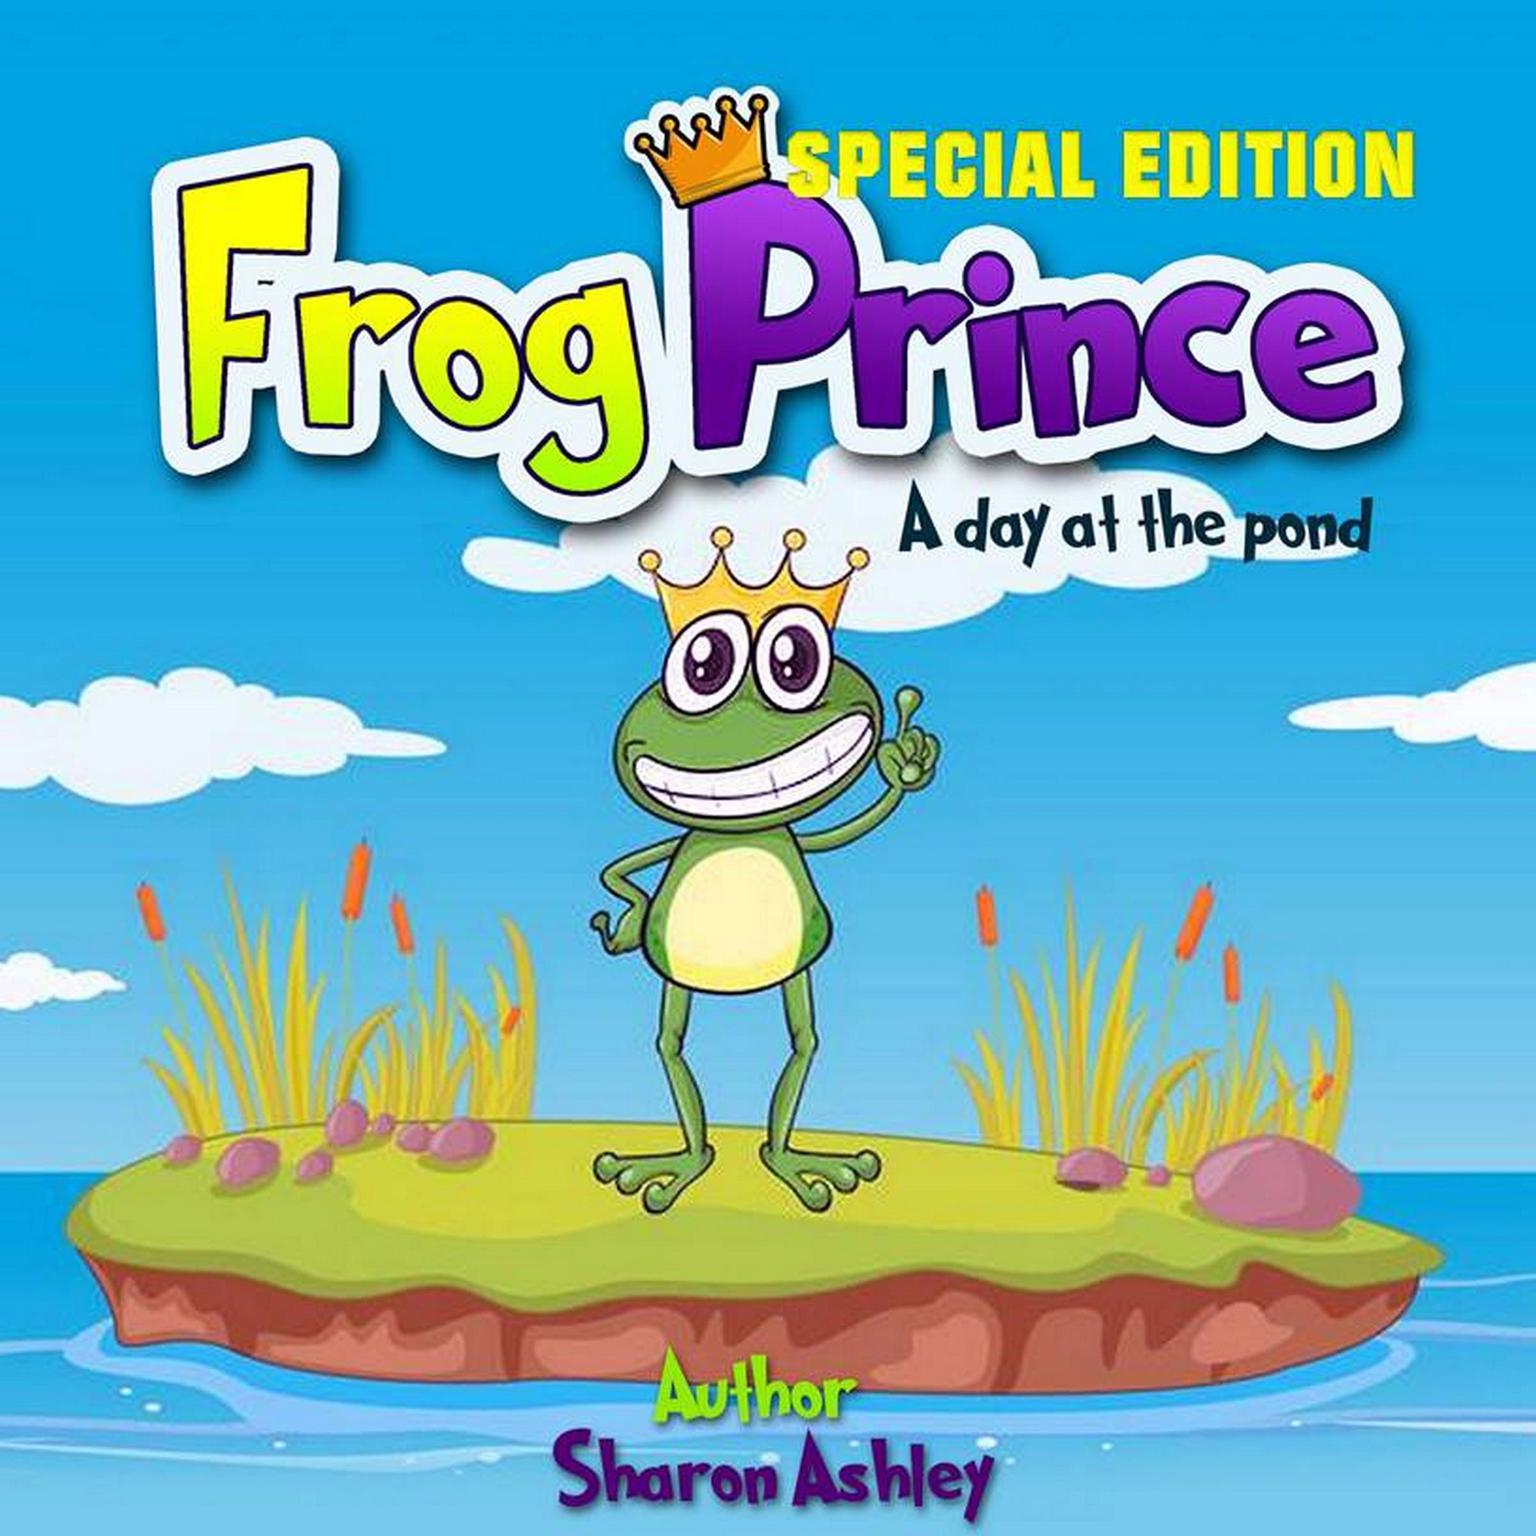 Frog Prince: A Day at the Pond (Special Edition) Audiobook, by Sharon Ashley